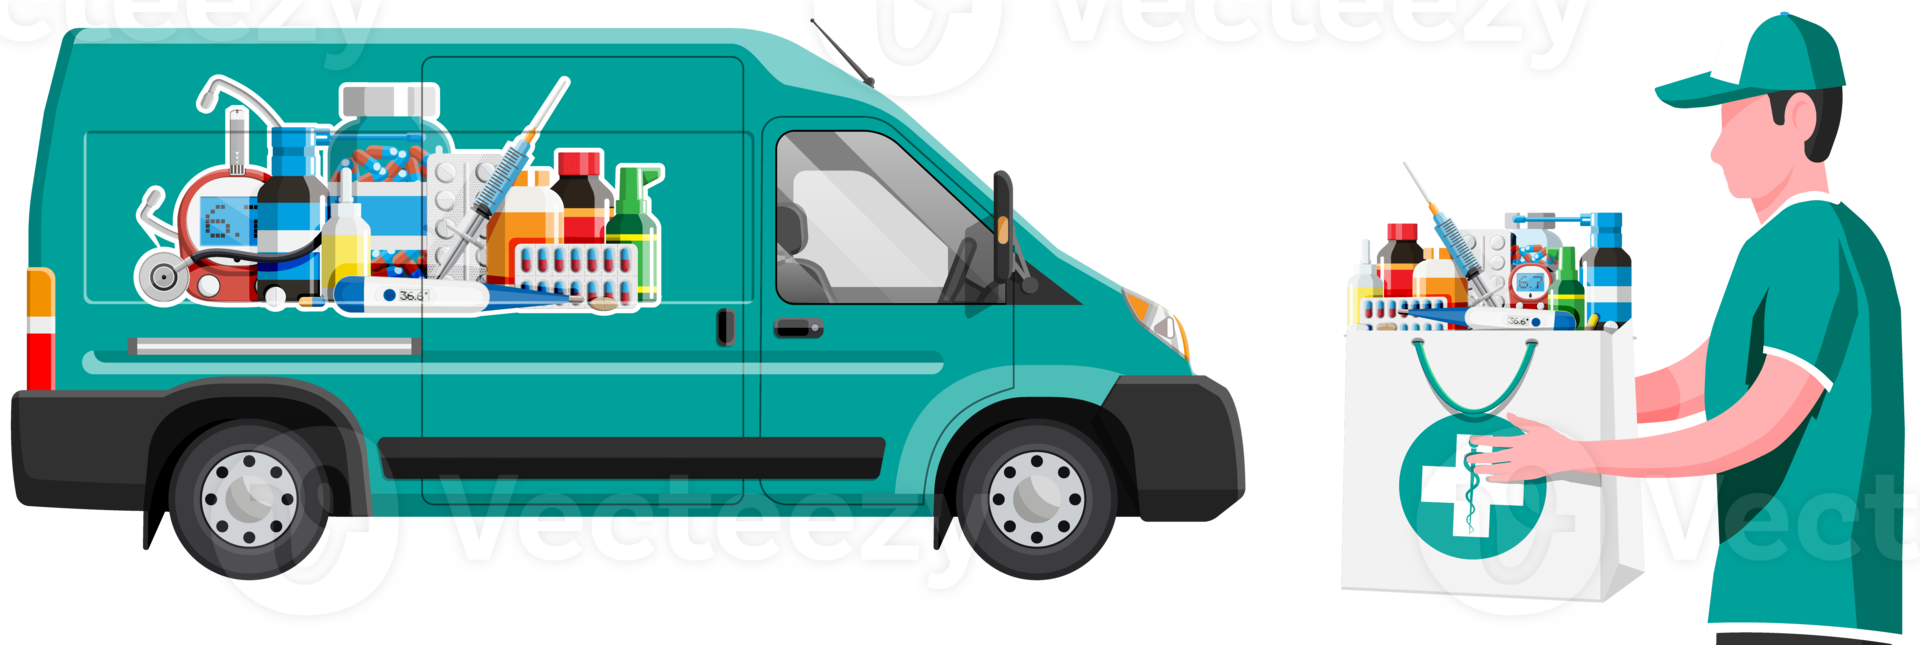 Van for delivery pharmaceutical drugs. png